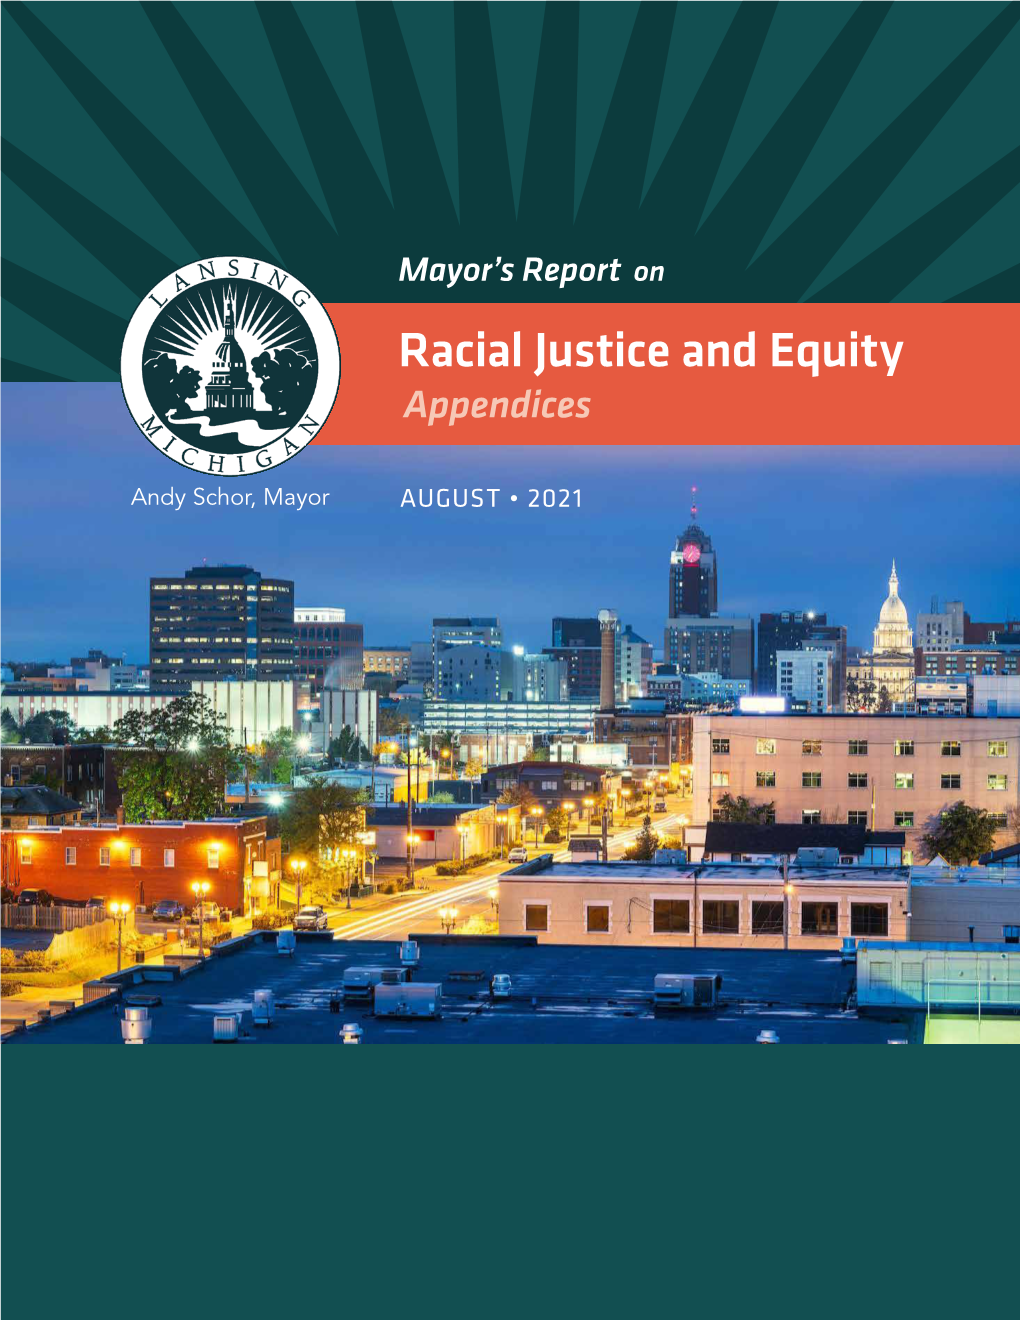 Racial Justice and Equity Appendices